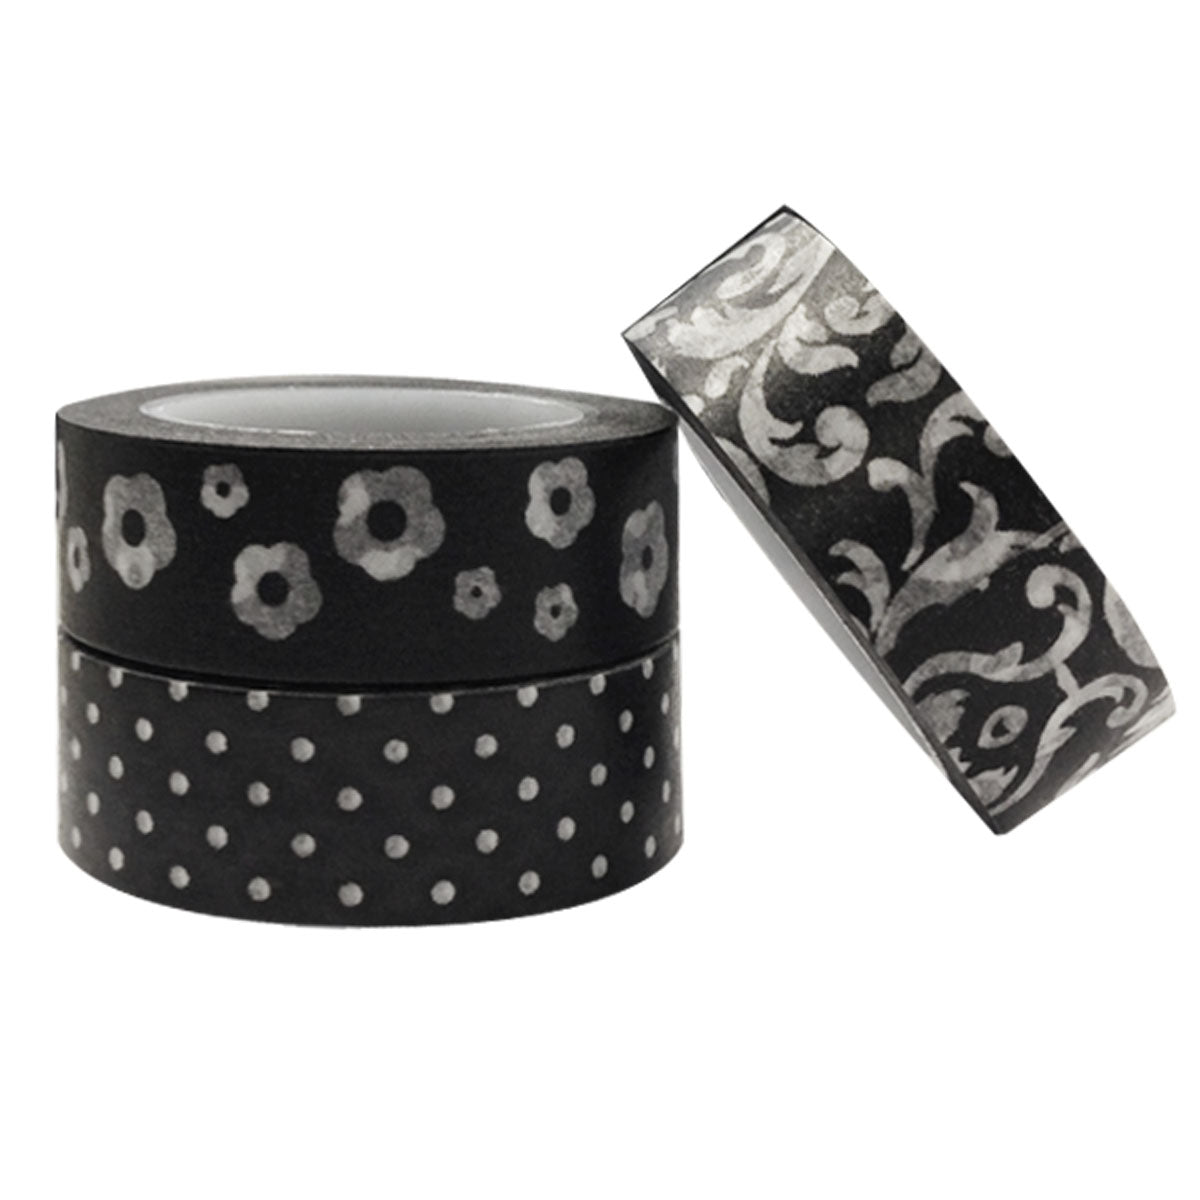 Wrapables In the Dark Washi Masking Tape (Set of 3)